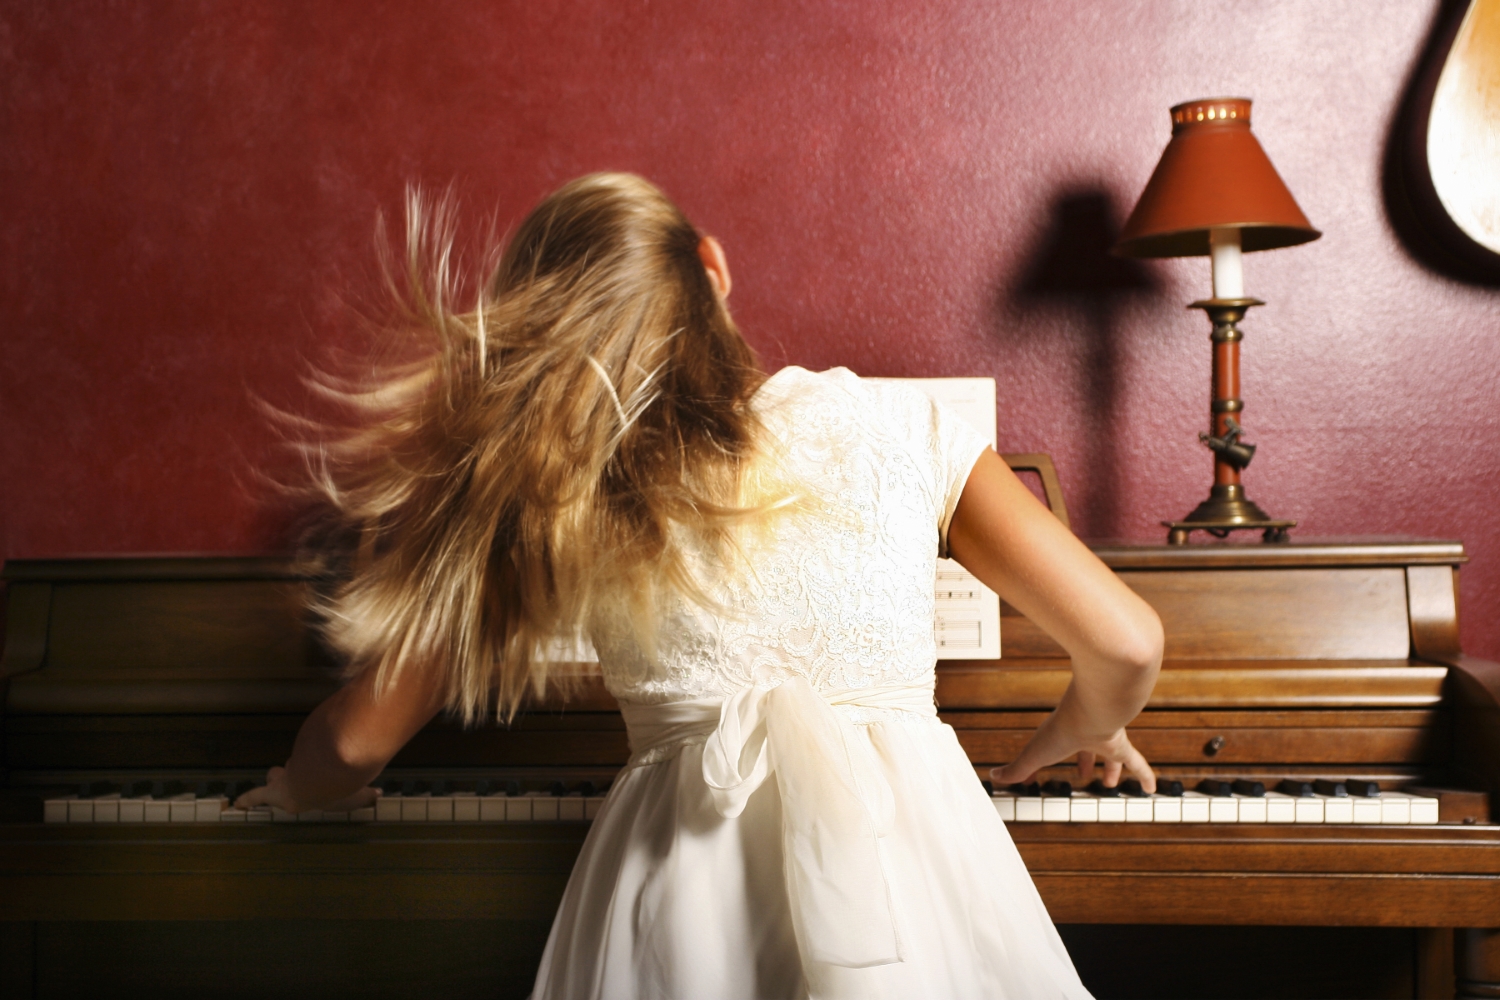 Girl Practicing the Piano